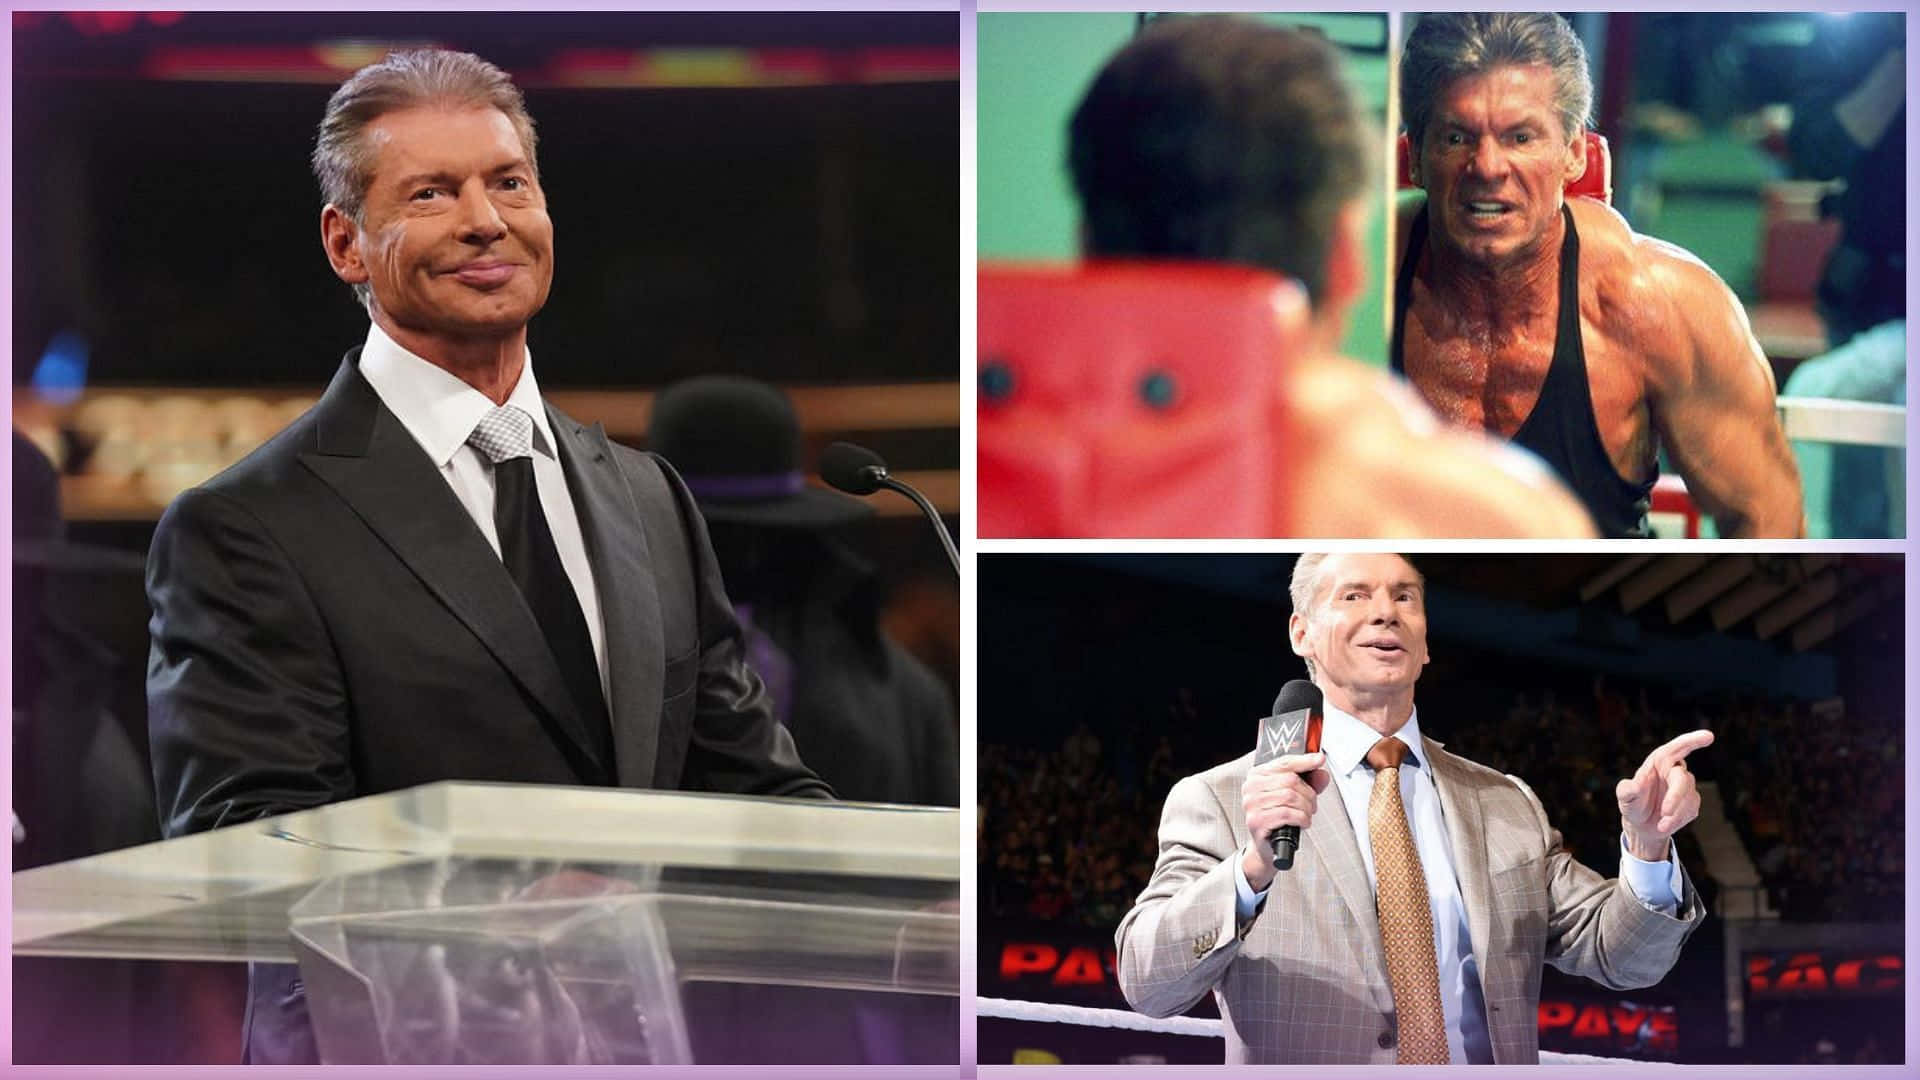 Wwe Ceo Vince Mcmahon Collage